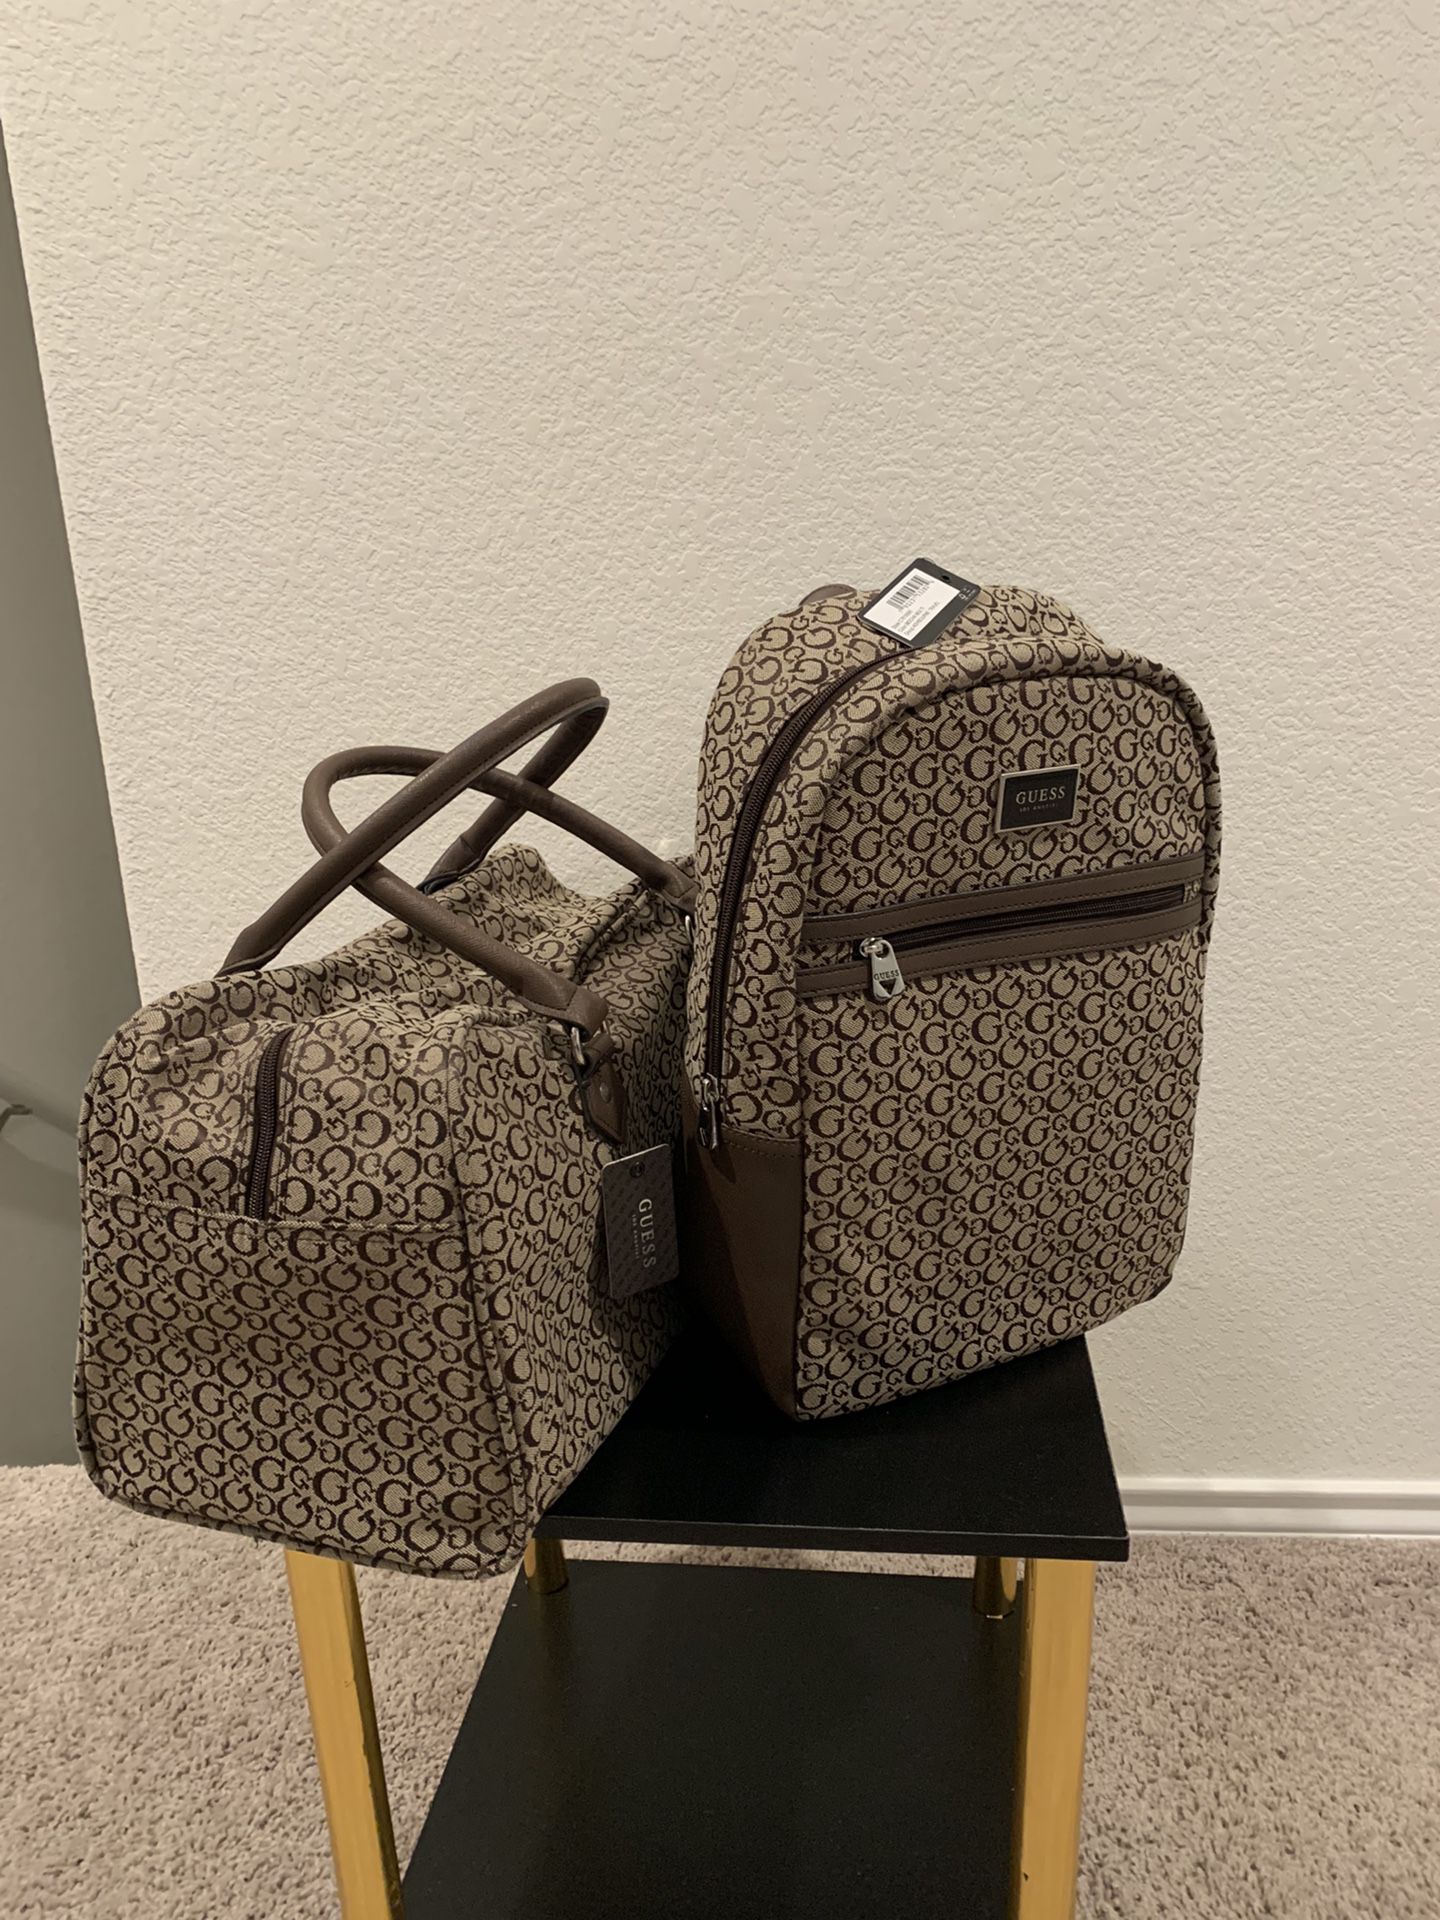 Women’s Guess Duffle Bag And Backpack!